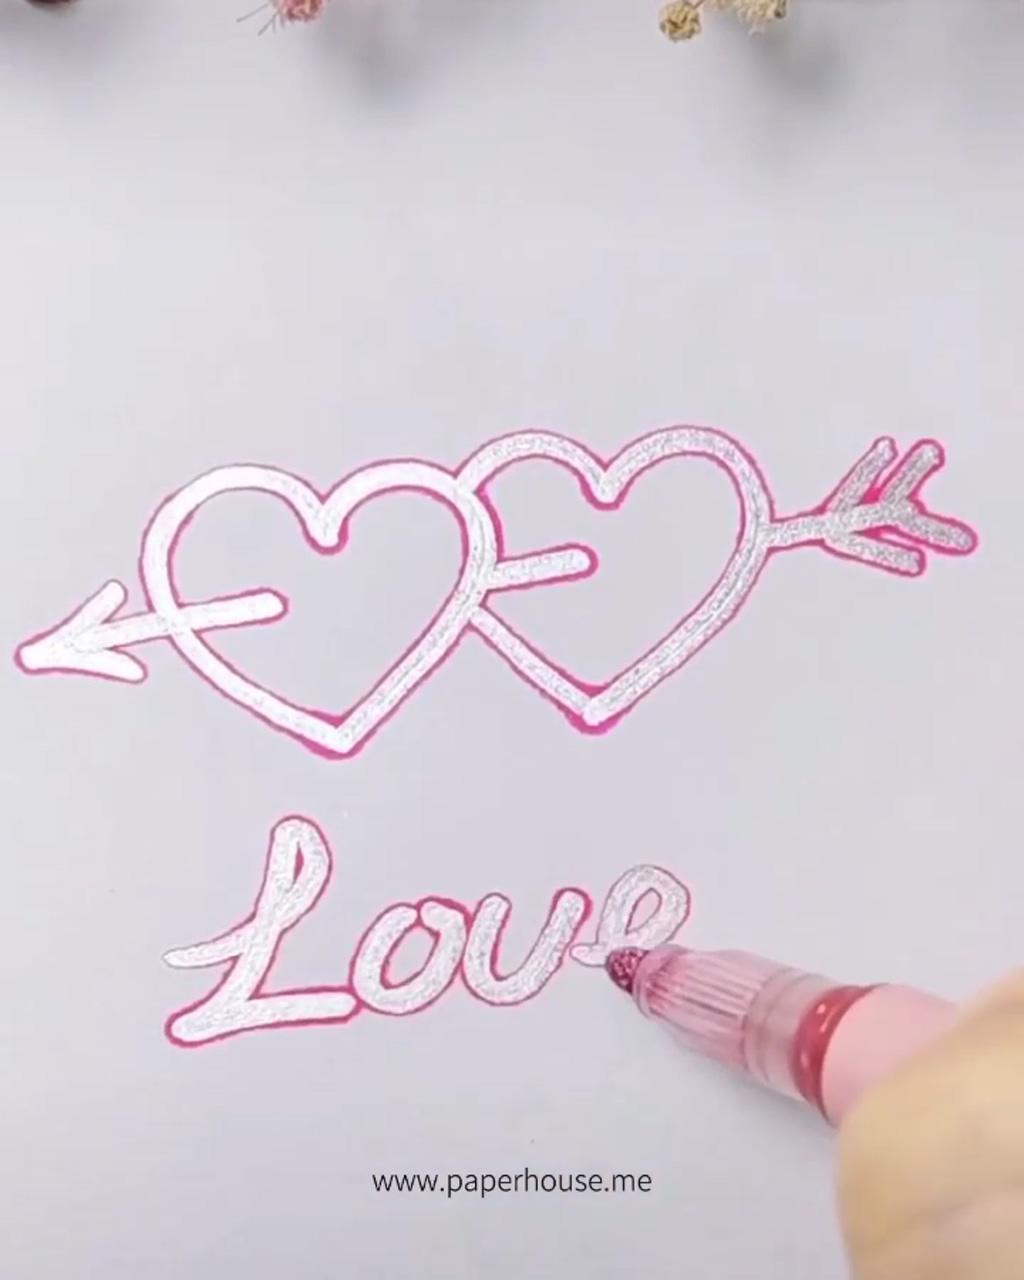 Get paperhouse outline marker at www. paperhouse. mepaperhouse stationery; cute drawings for kids